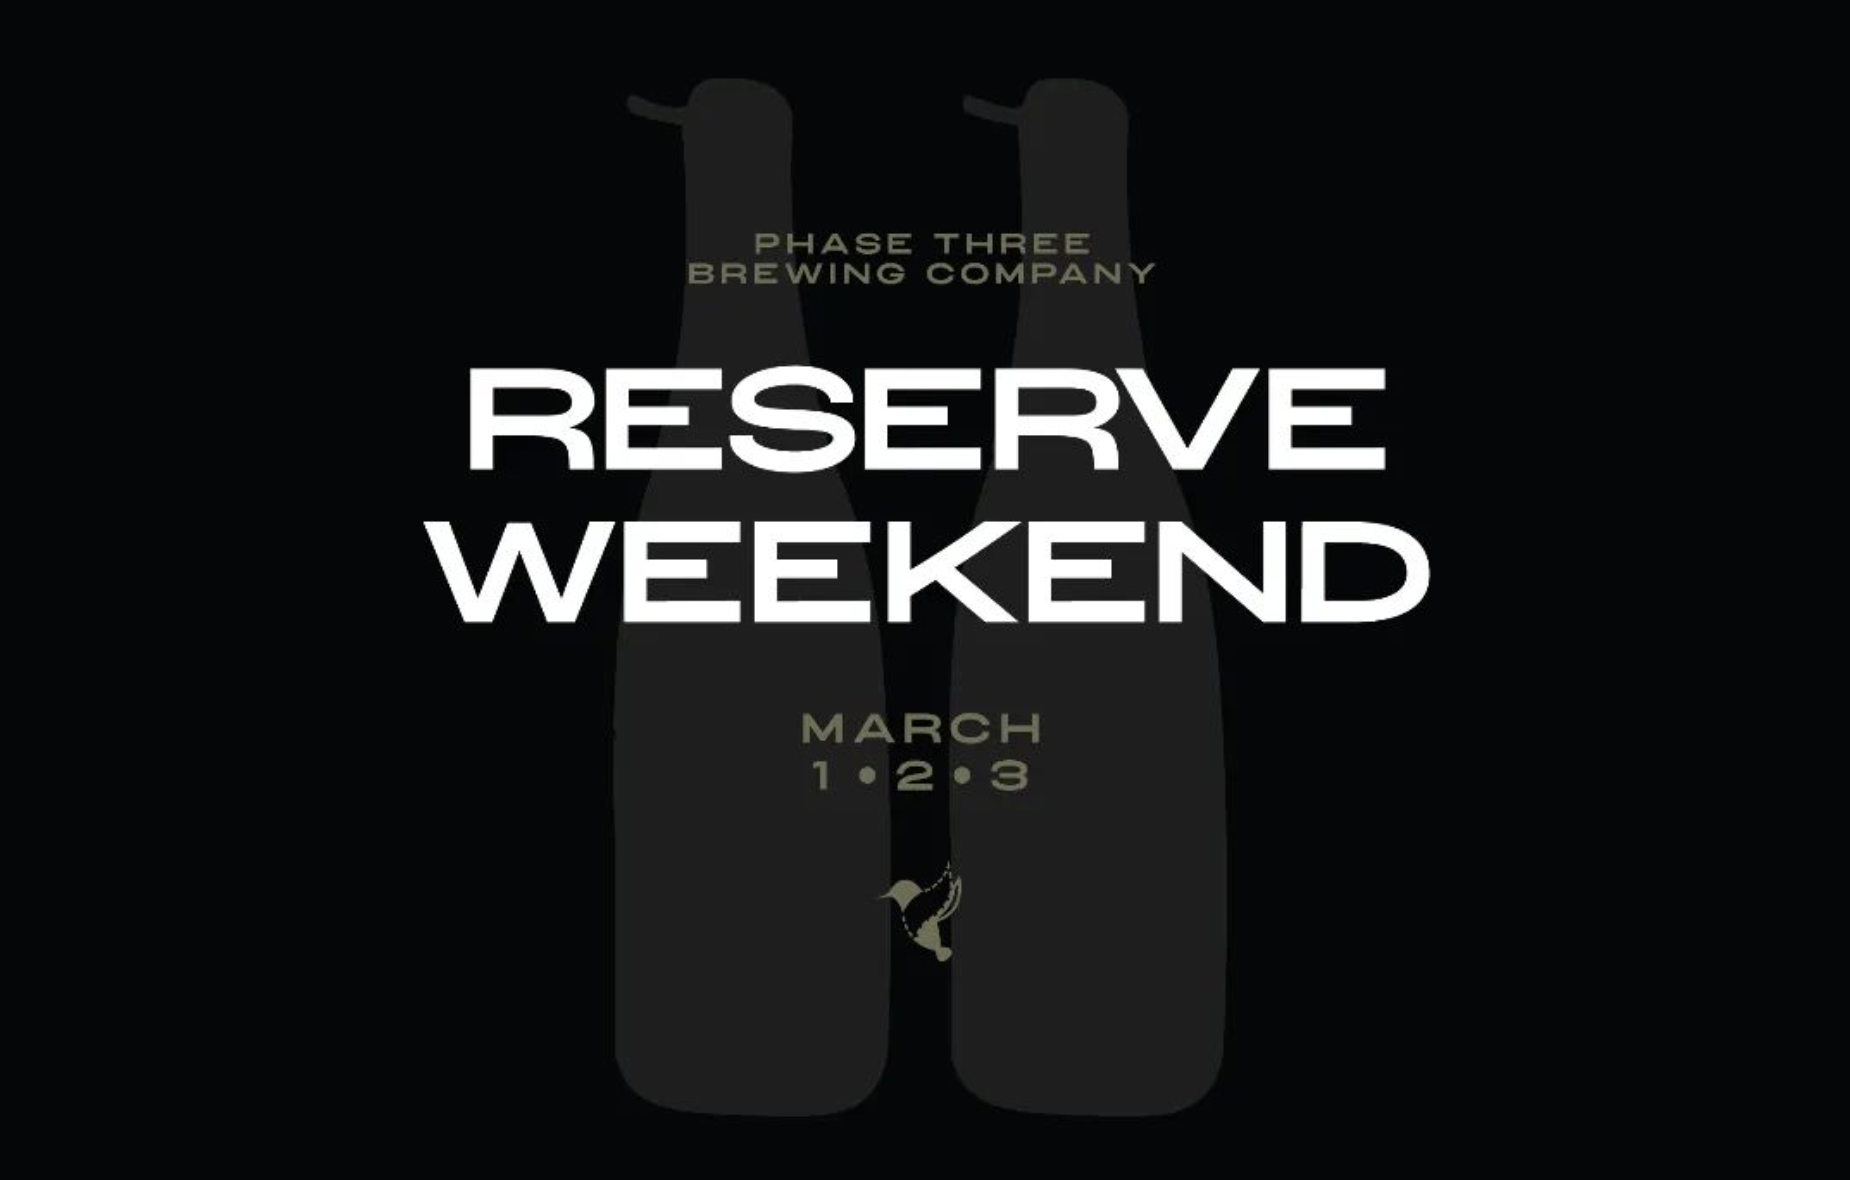 Reserve Weekend from Phase Three Brewing